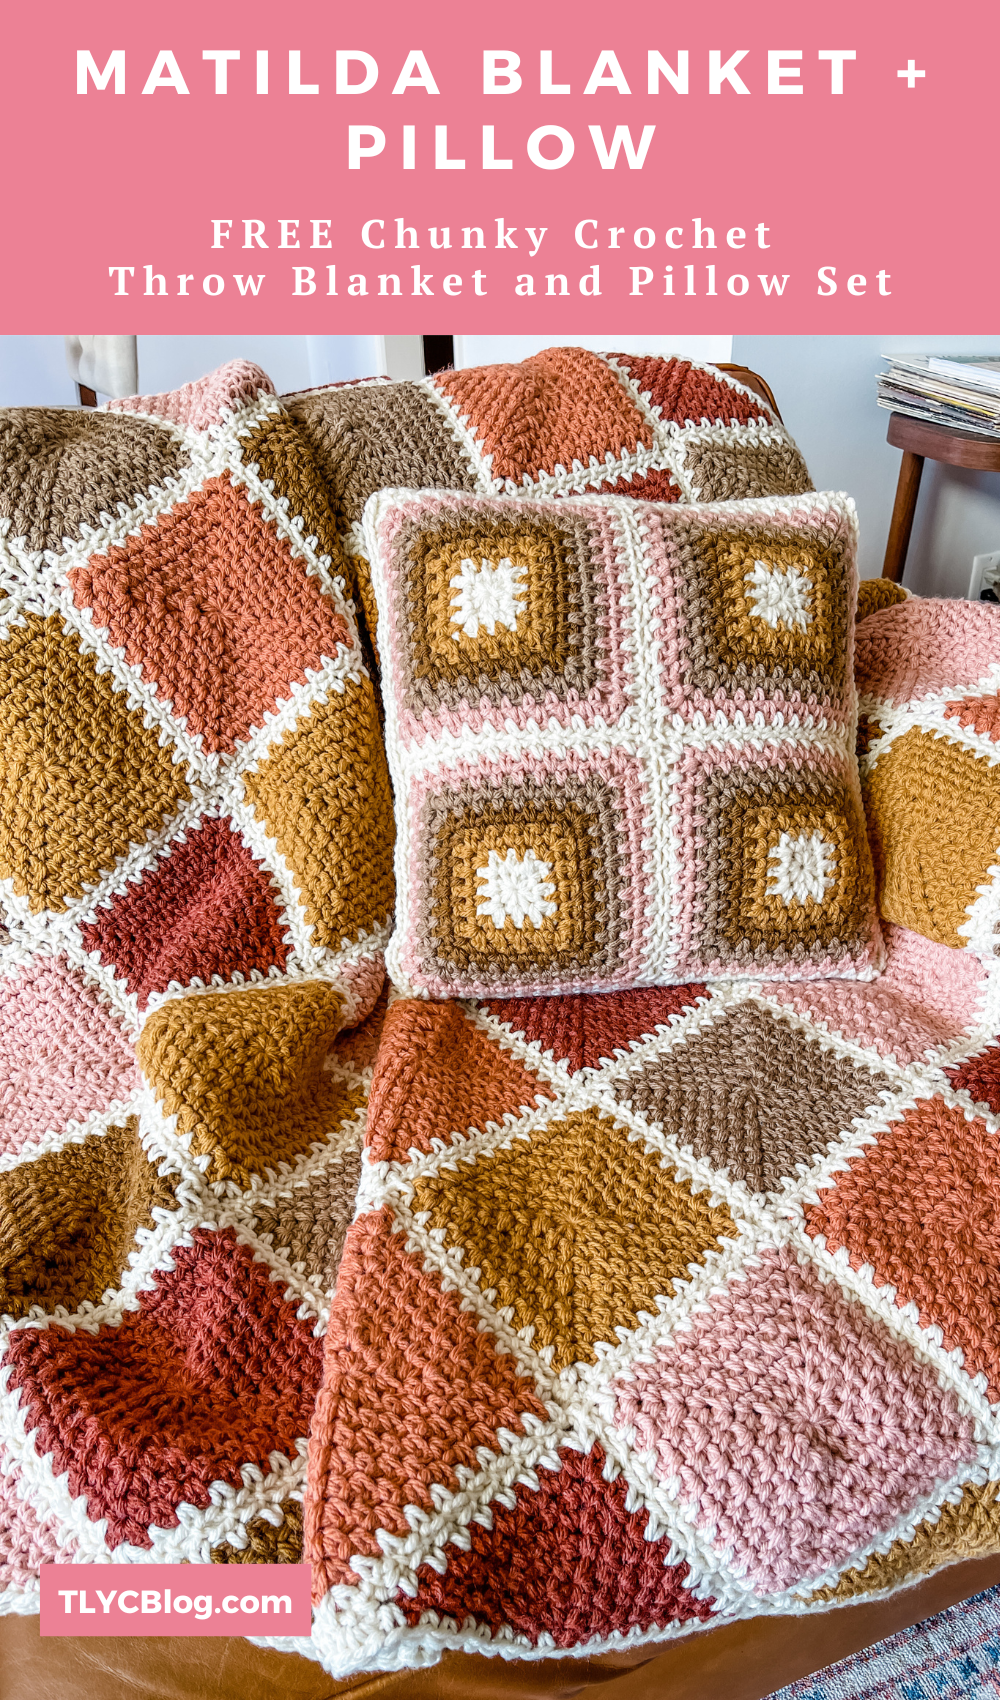 Free crochet pattern - square motif blanket and pillow set, linen stitch square chunky crochet blanket and cushion. 